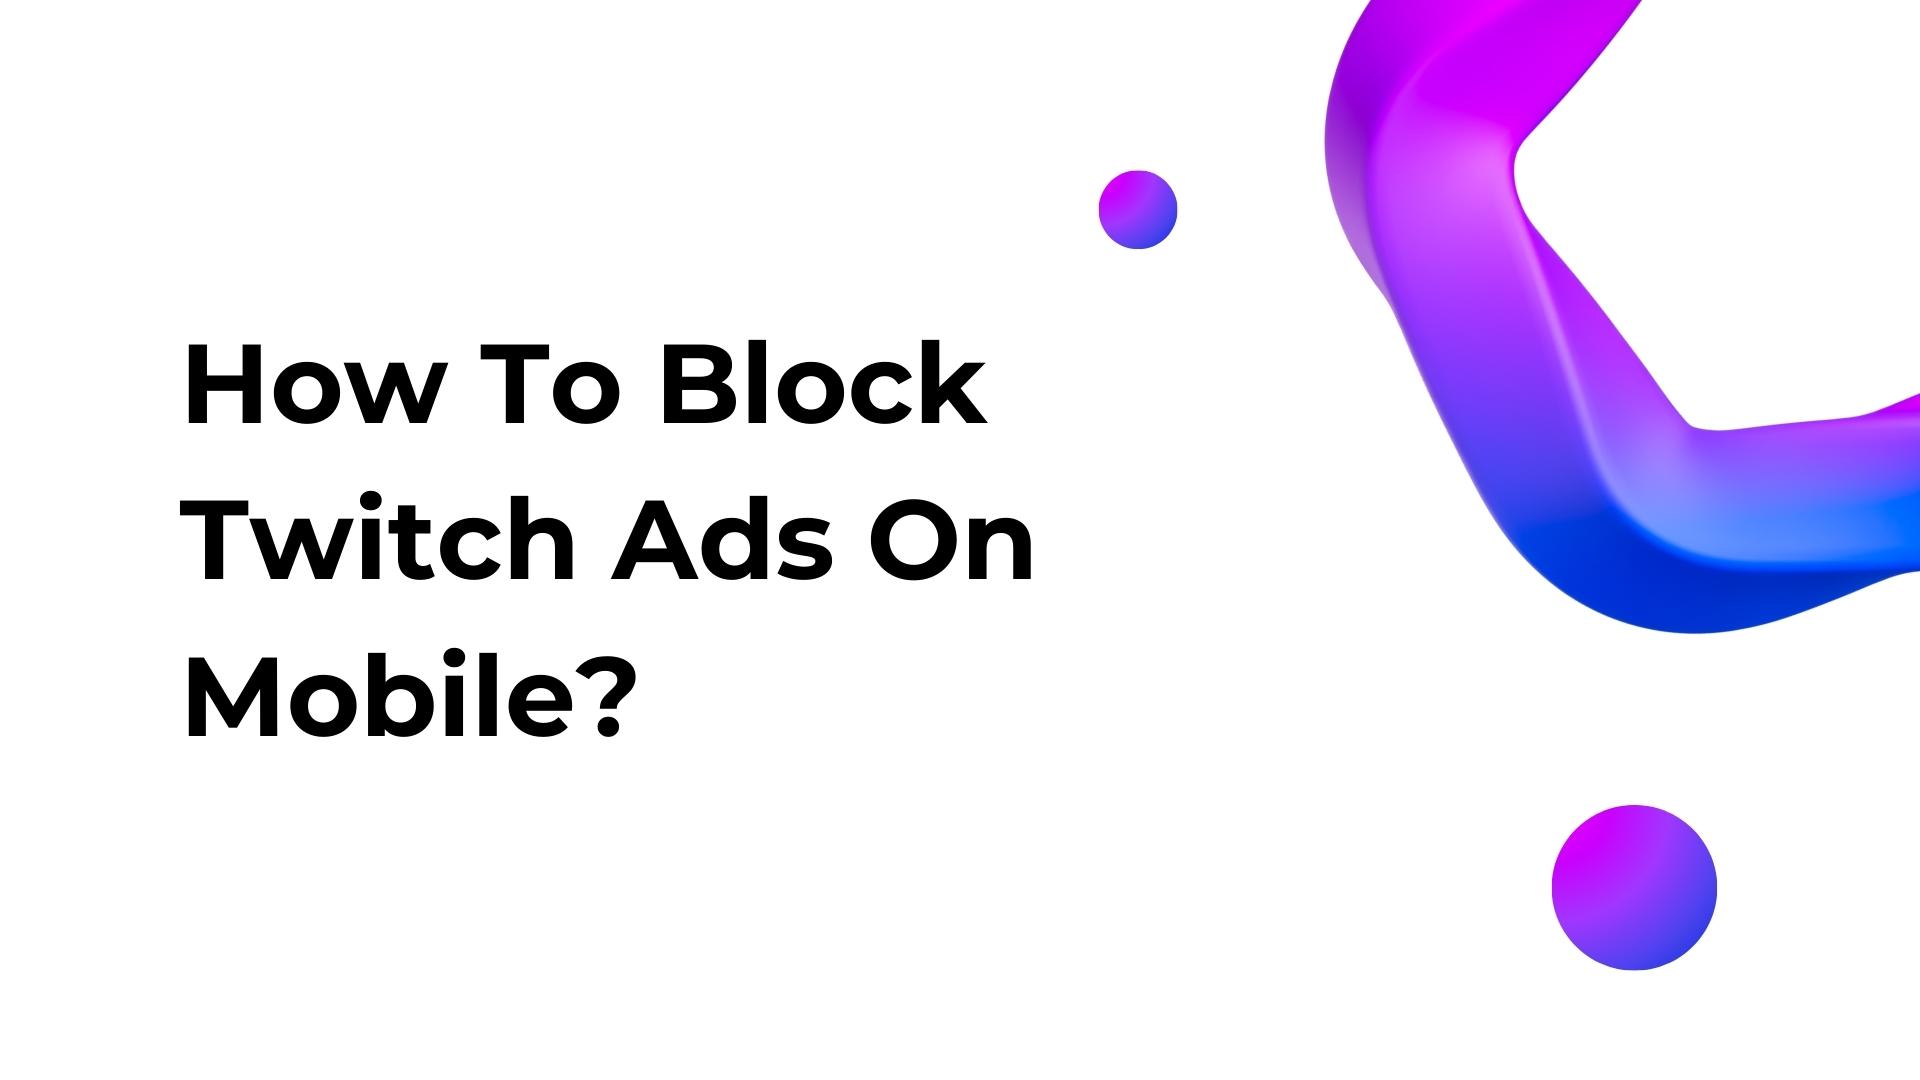 How To Block Twitch Ads On Mobile?